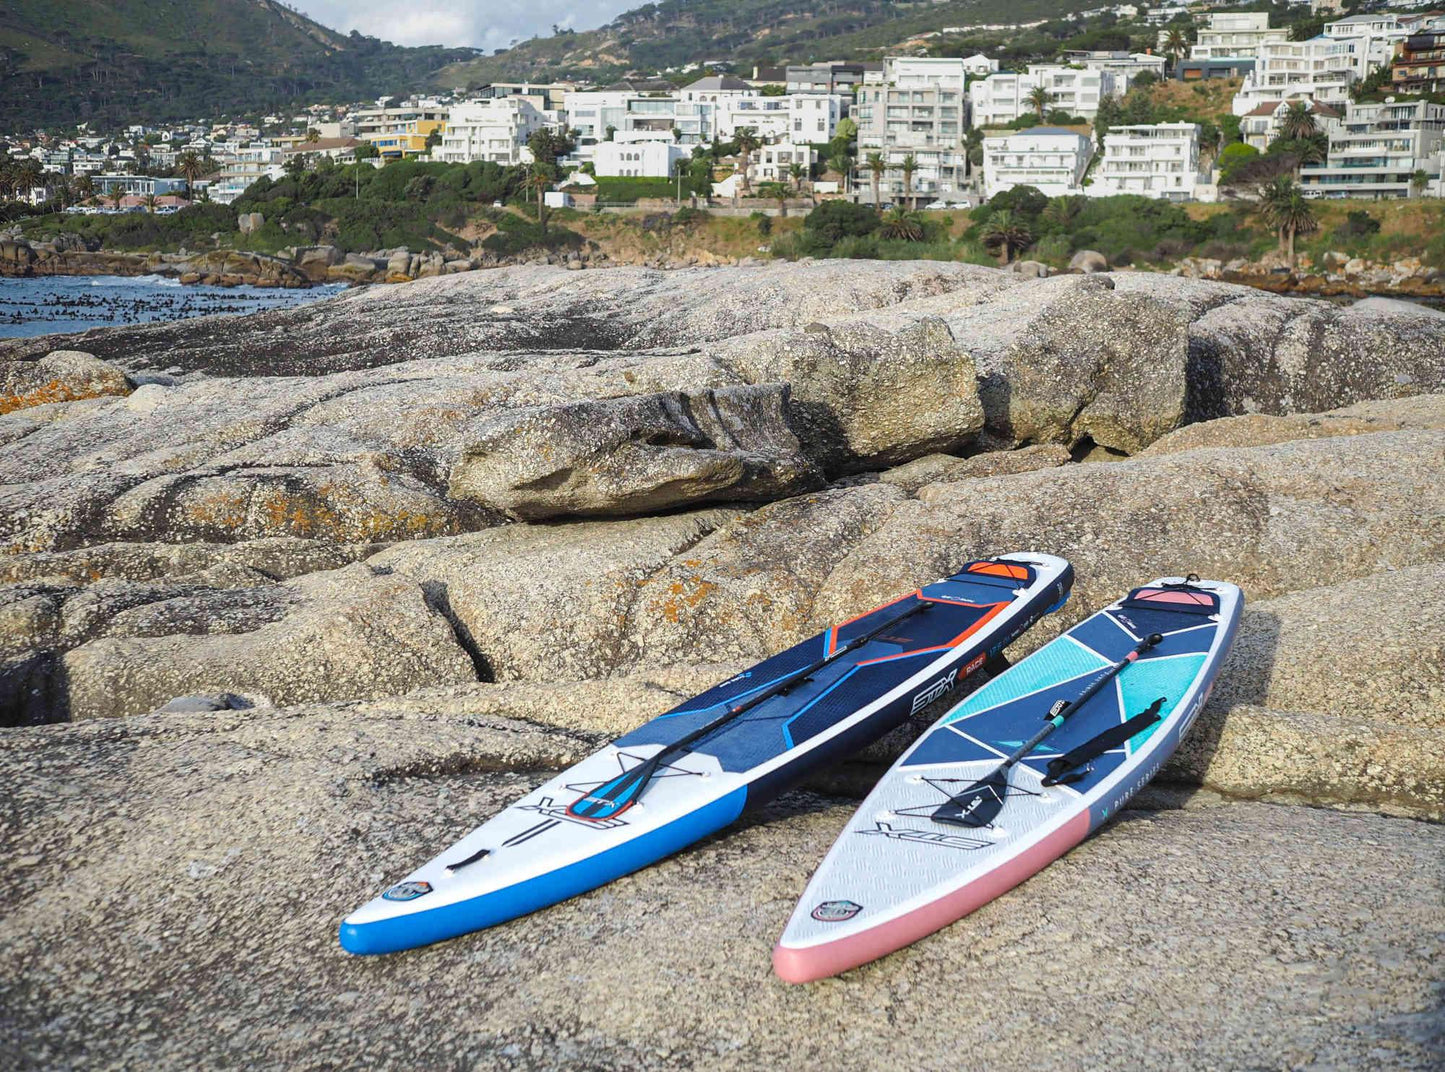 STX Tourer Inflatable SUP 2022 - Poole Harbour Watersports